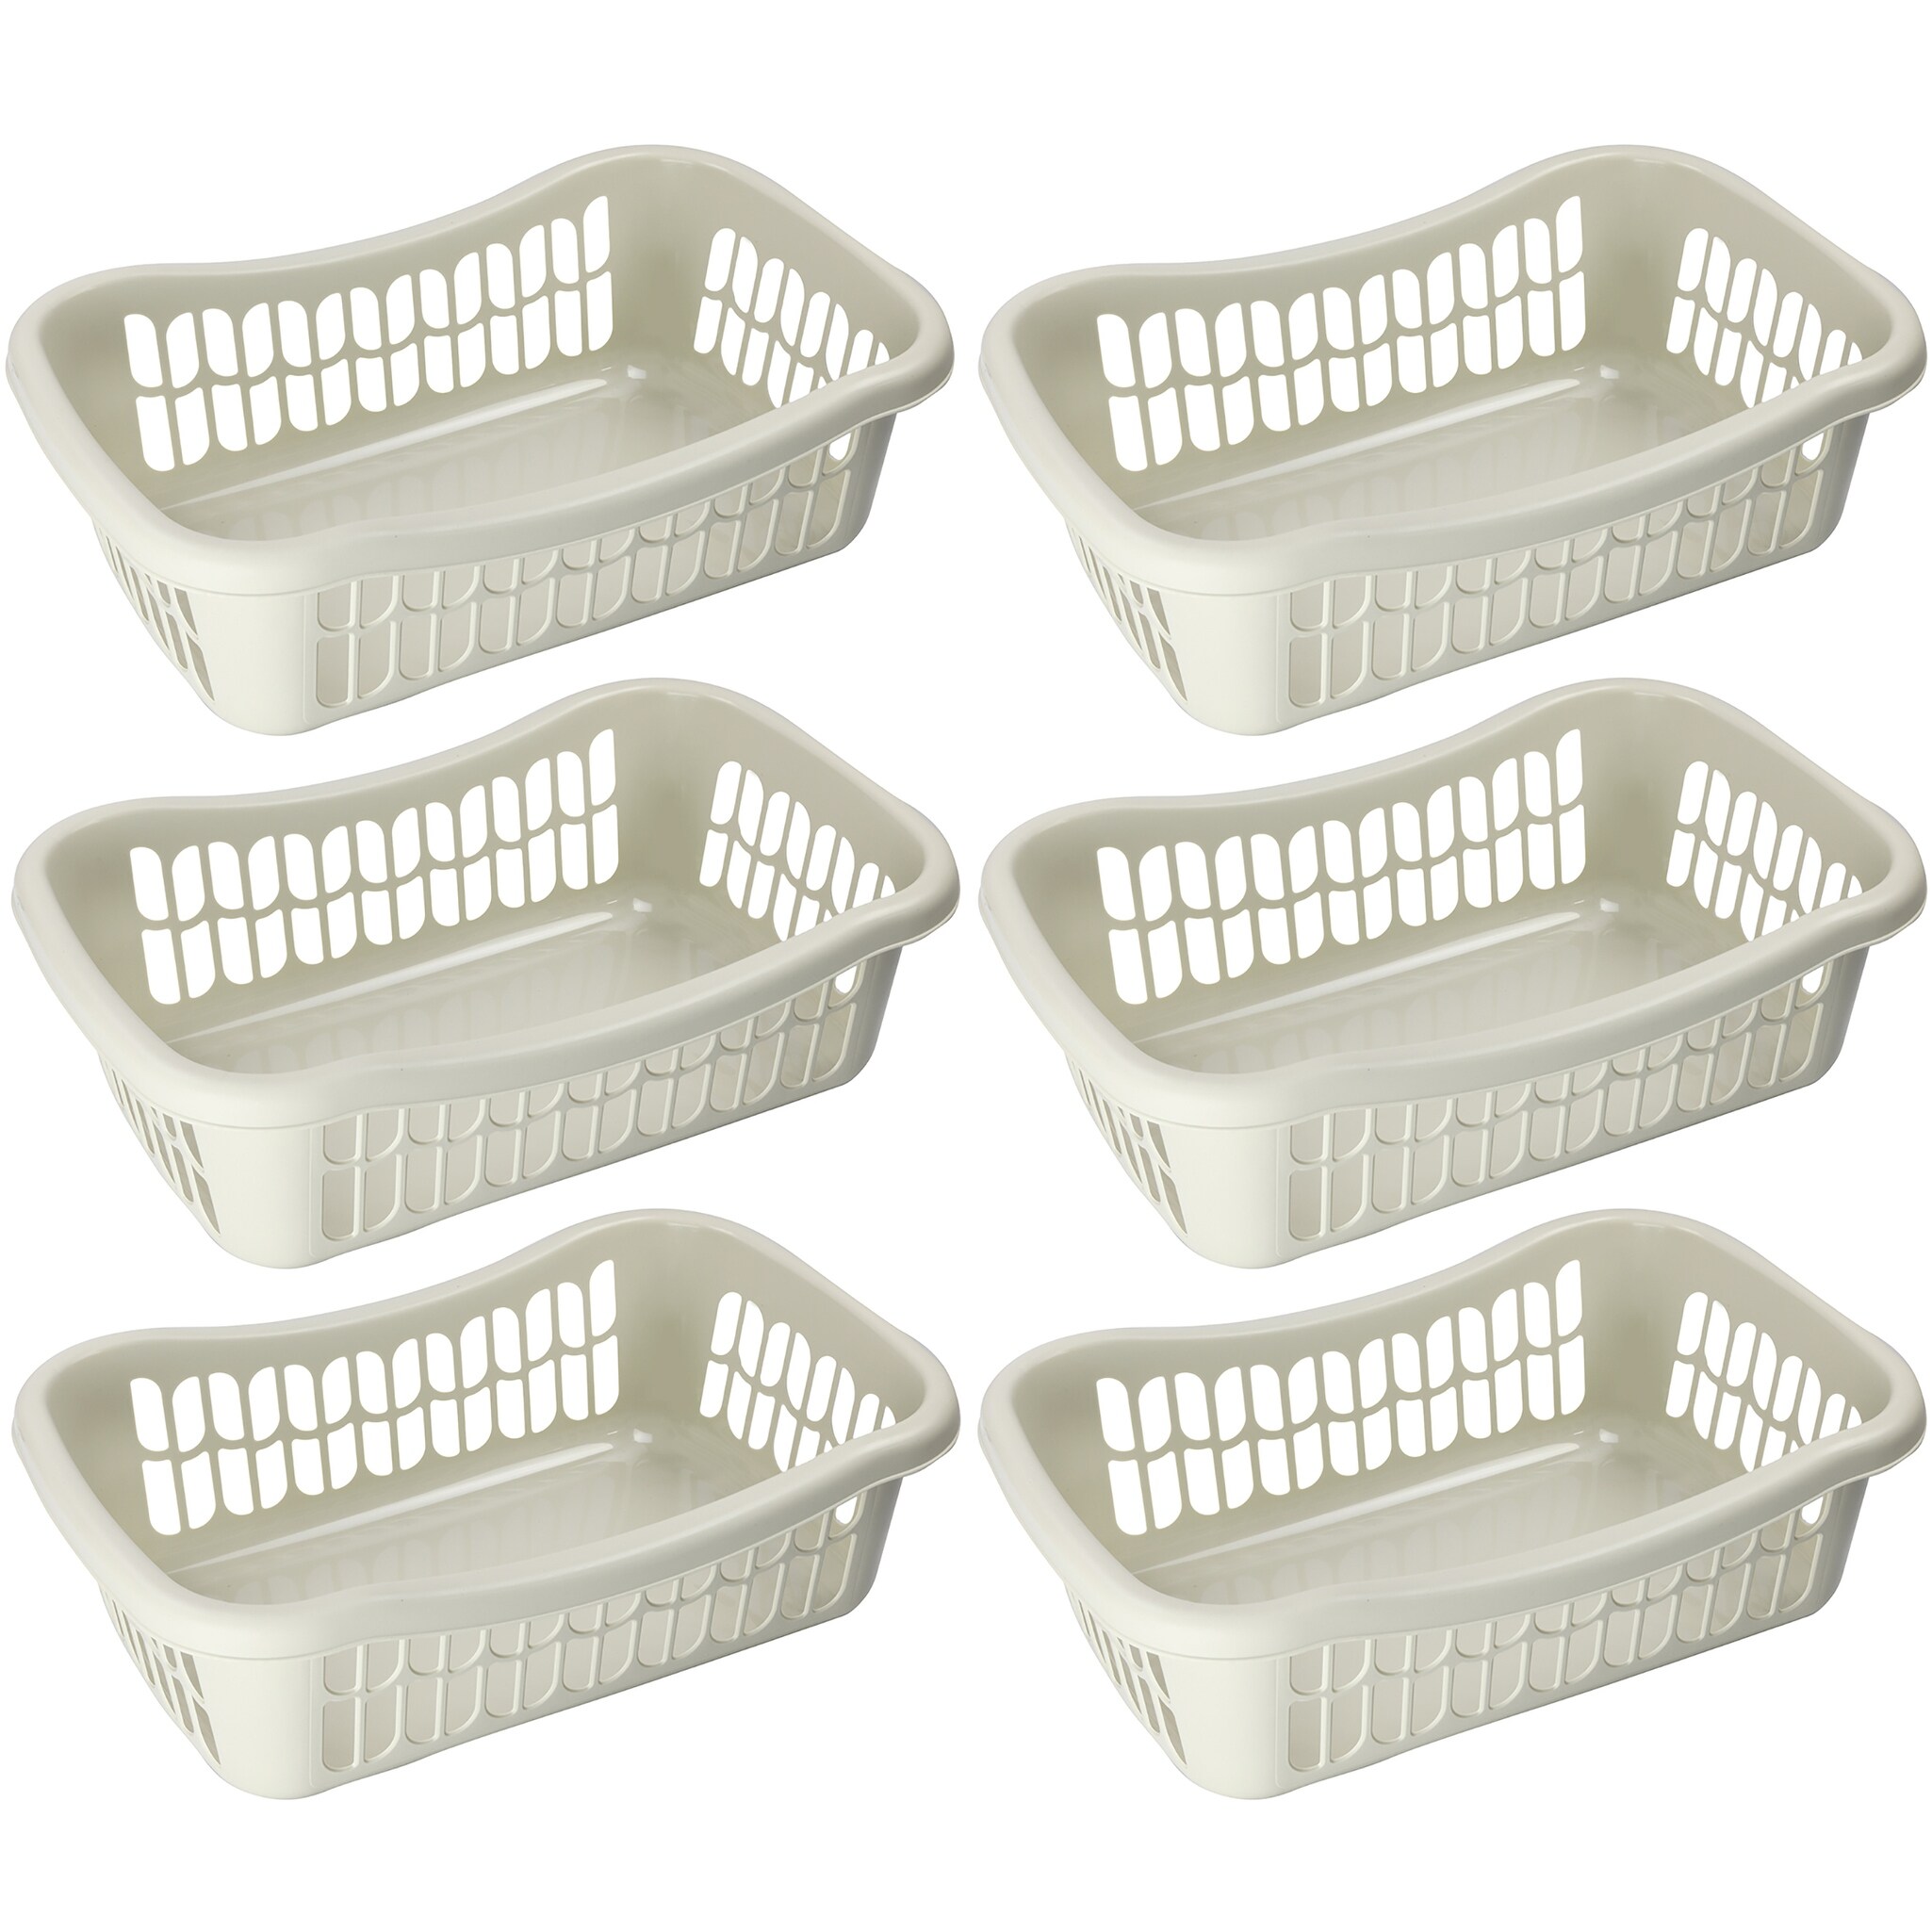 https://ak1.ostkcdn.com/images/products/is/images/direct/6776ba869c6befe6e410c888c60aa91492069d90/Large-Plastic-Storage-Basket-for-Organizing-Kitchen-Pantry%2C-Kids-Room.jpg